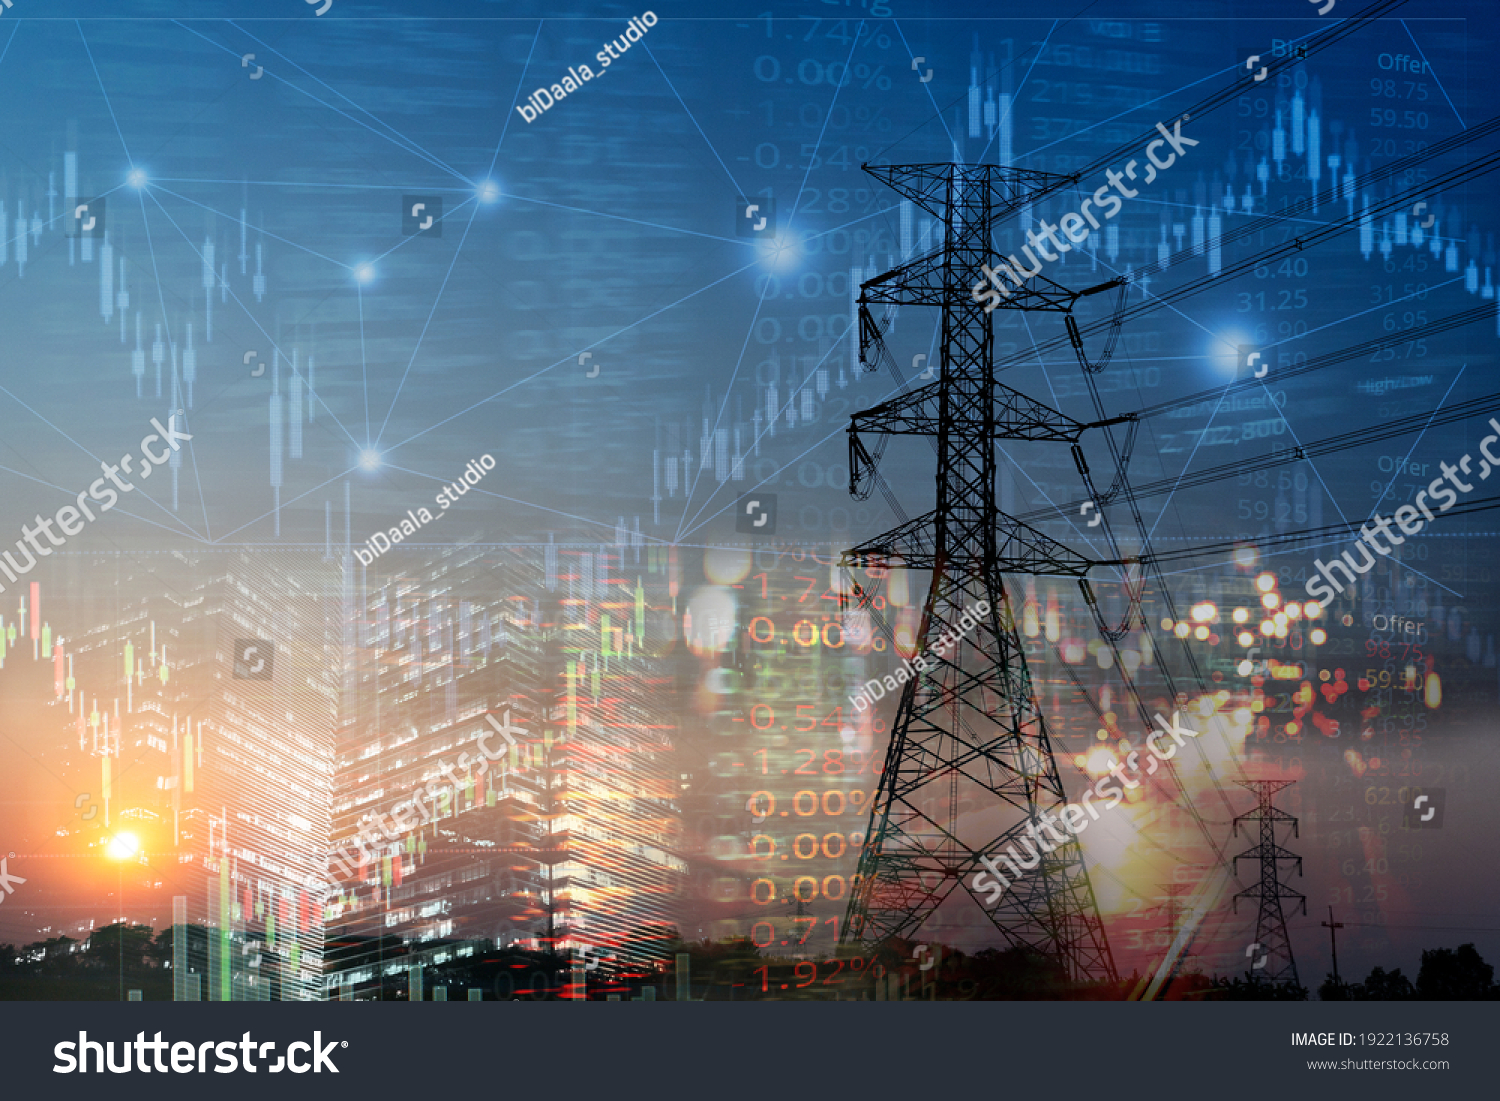 market stock graph and index information with city light and electricity and energy facility industry and business background #1922136758